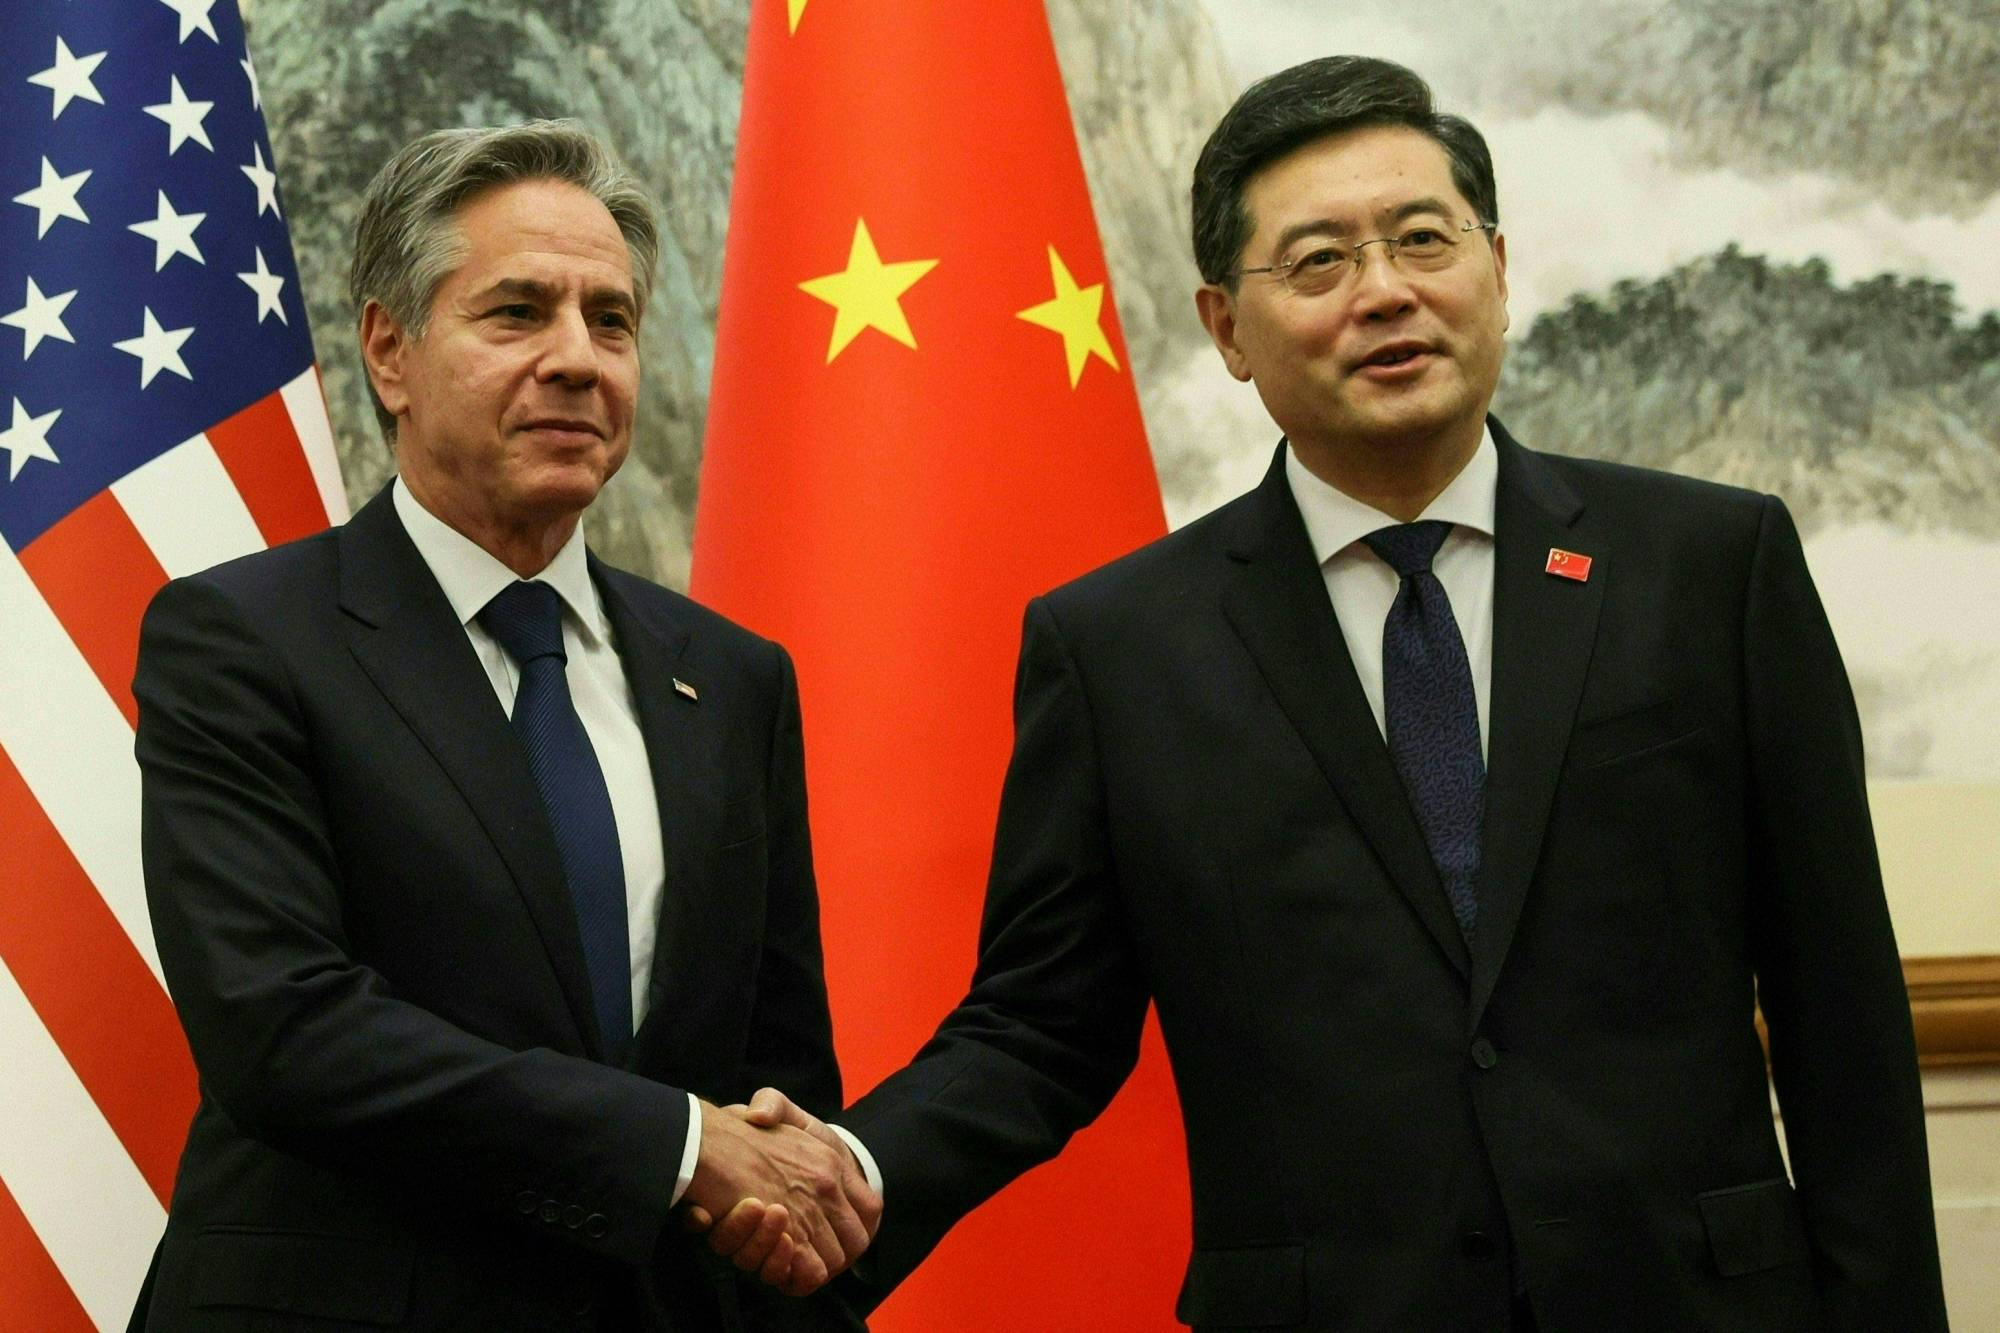 US Secretary of State Antony Blinken and China's Foreign Minister Qin Gang shake hands ahead of a meeting at the Diaoyutai State Guesthouse in Beijing